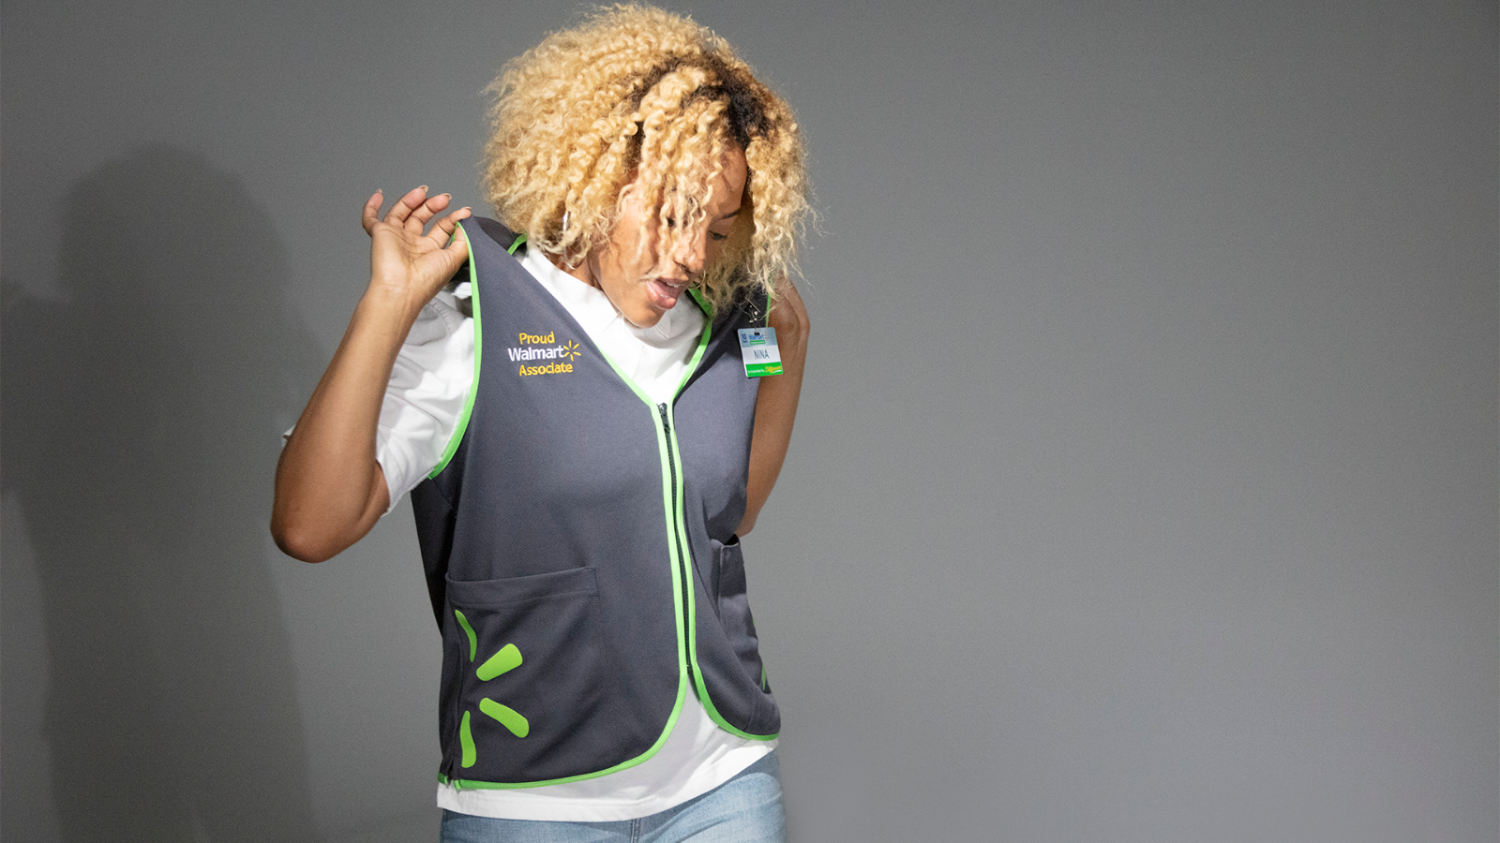 Walmart Has Designed Inclusive Vests for Store-Level Employees